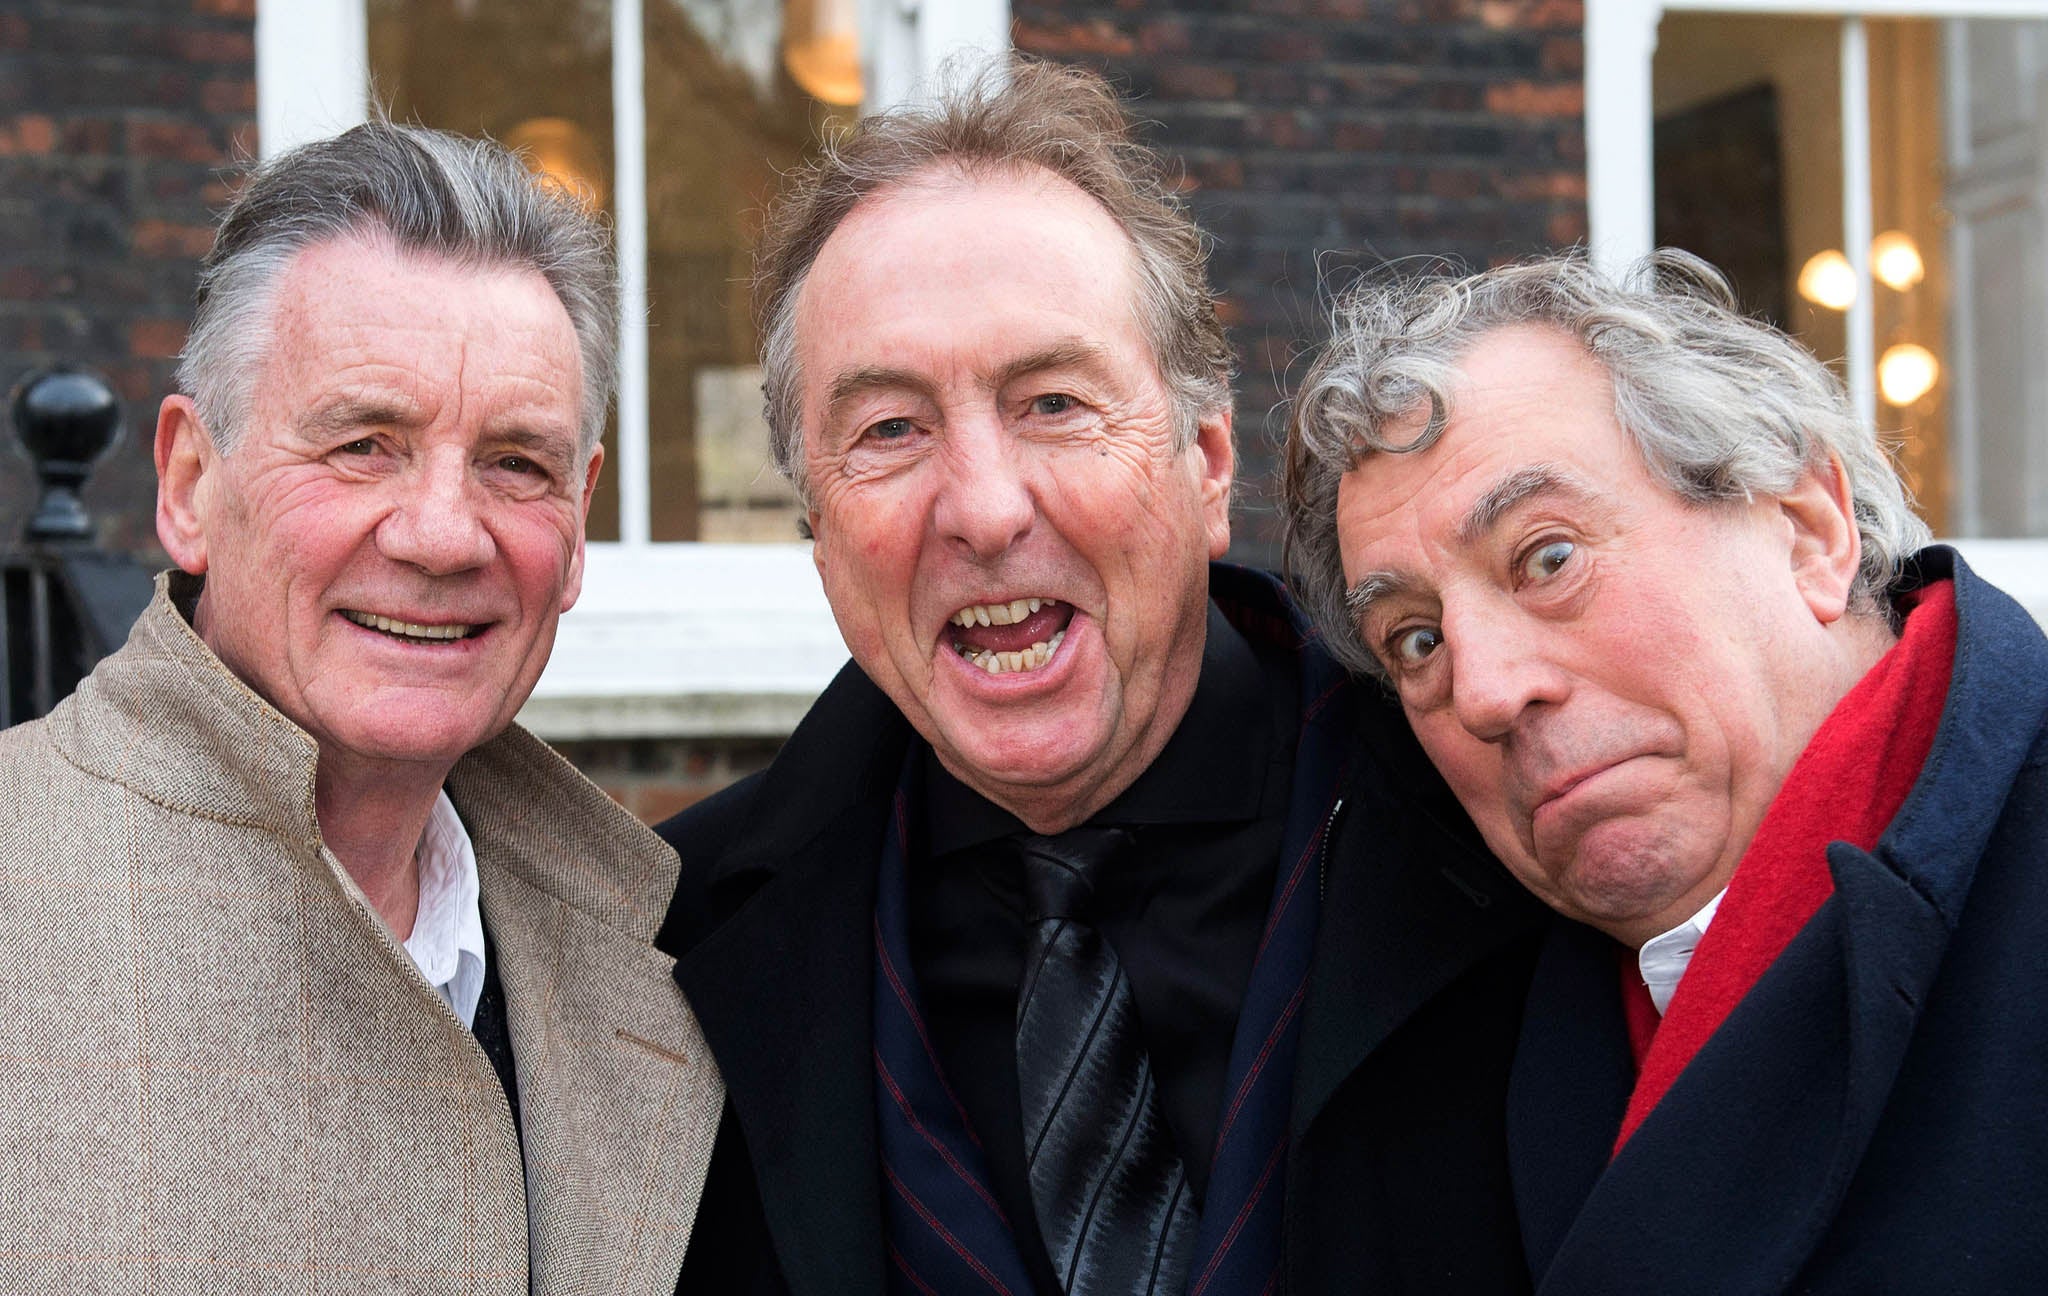 Michael Palin, Eric Idle and Terry Jones of Monty Python pose together ahead of a legal case at the High Court in a dispute over the hit musical Spamalot on 30 November. The Pythons lost the dispute and Mark Forstater, who produced the 1975 film Monty Python And The Holy Grail, claimed a share of profits from the spin-off musical Spamalot